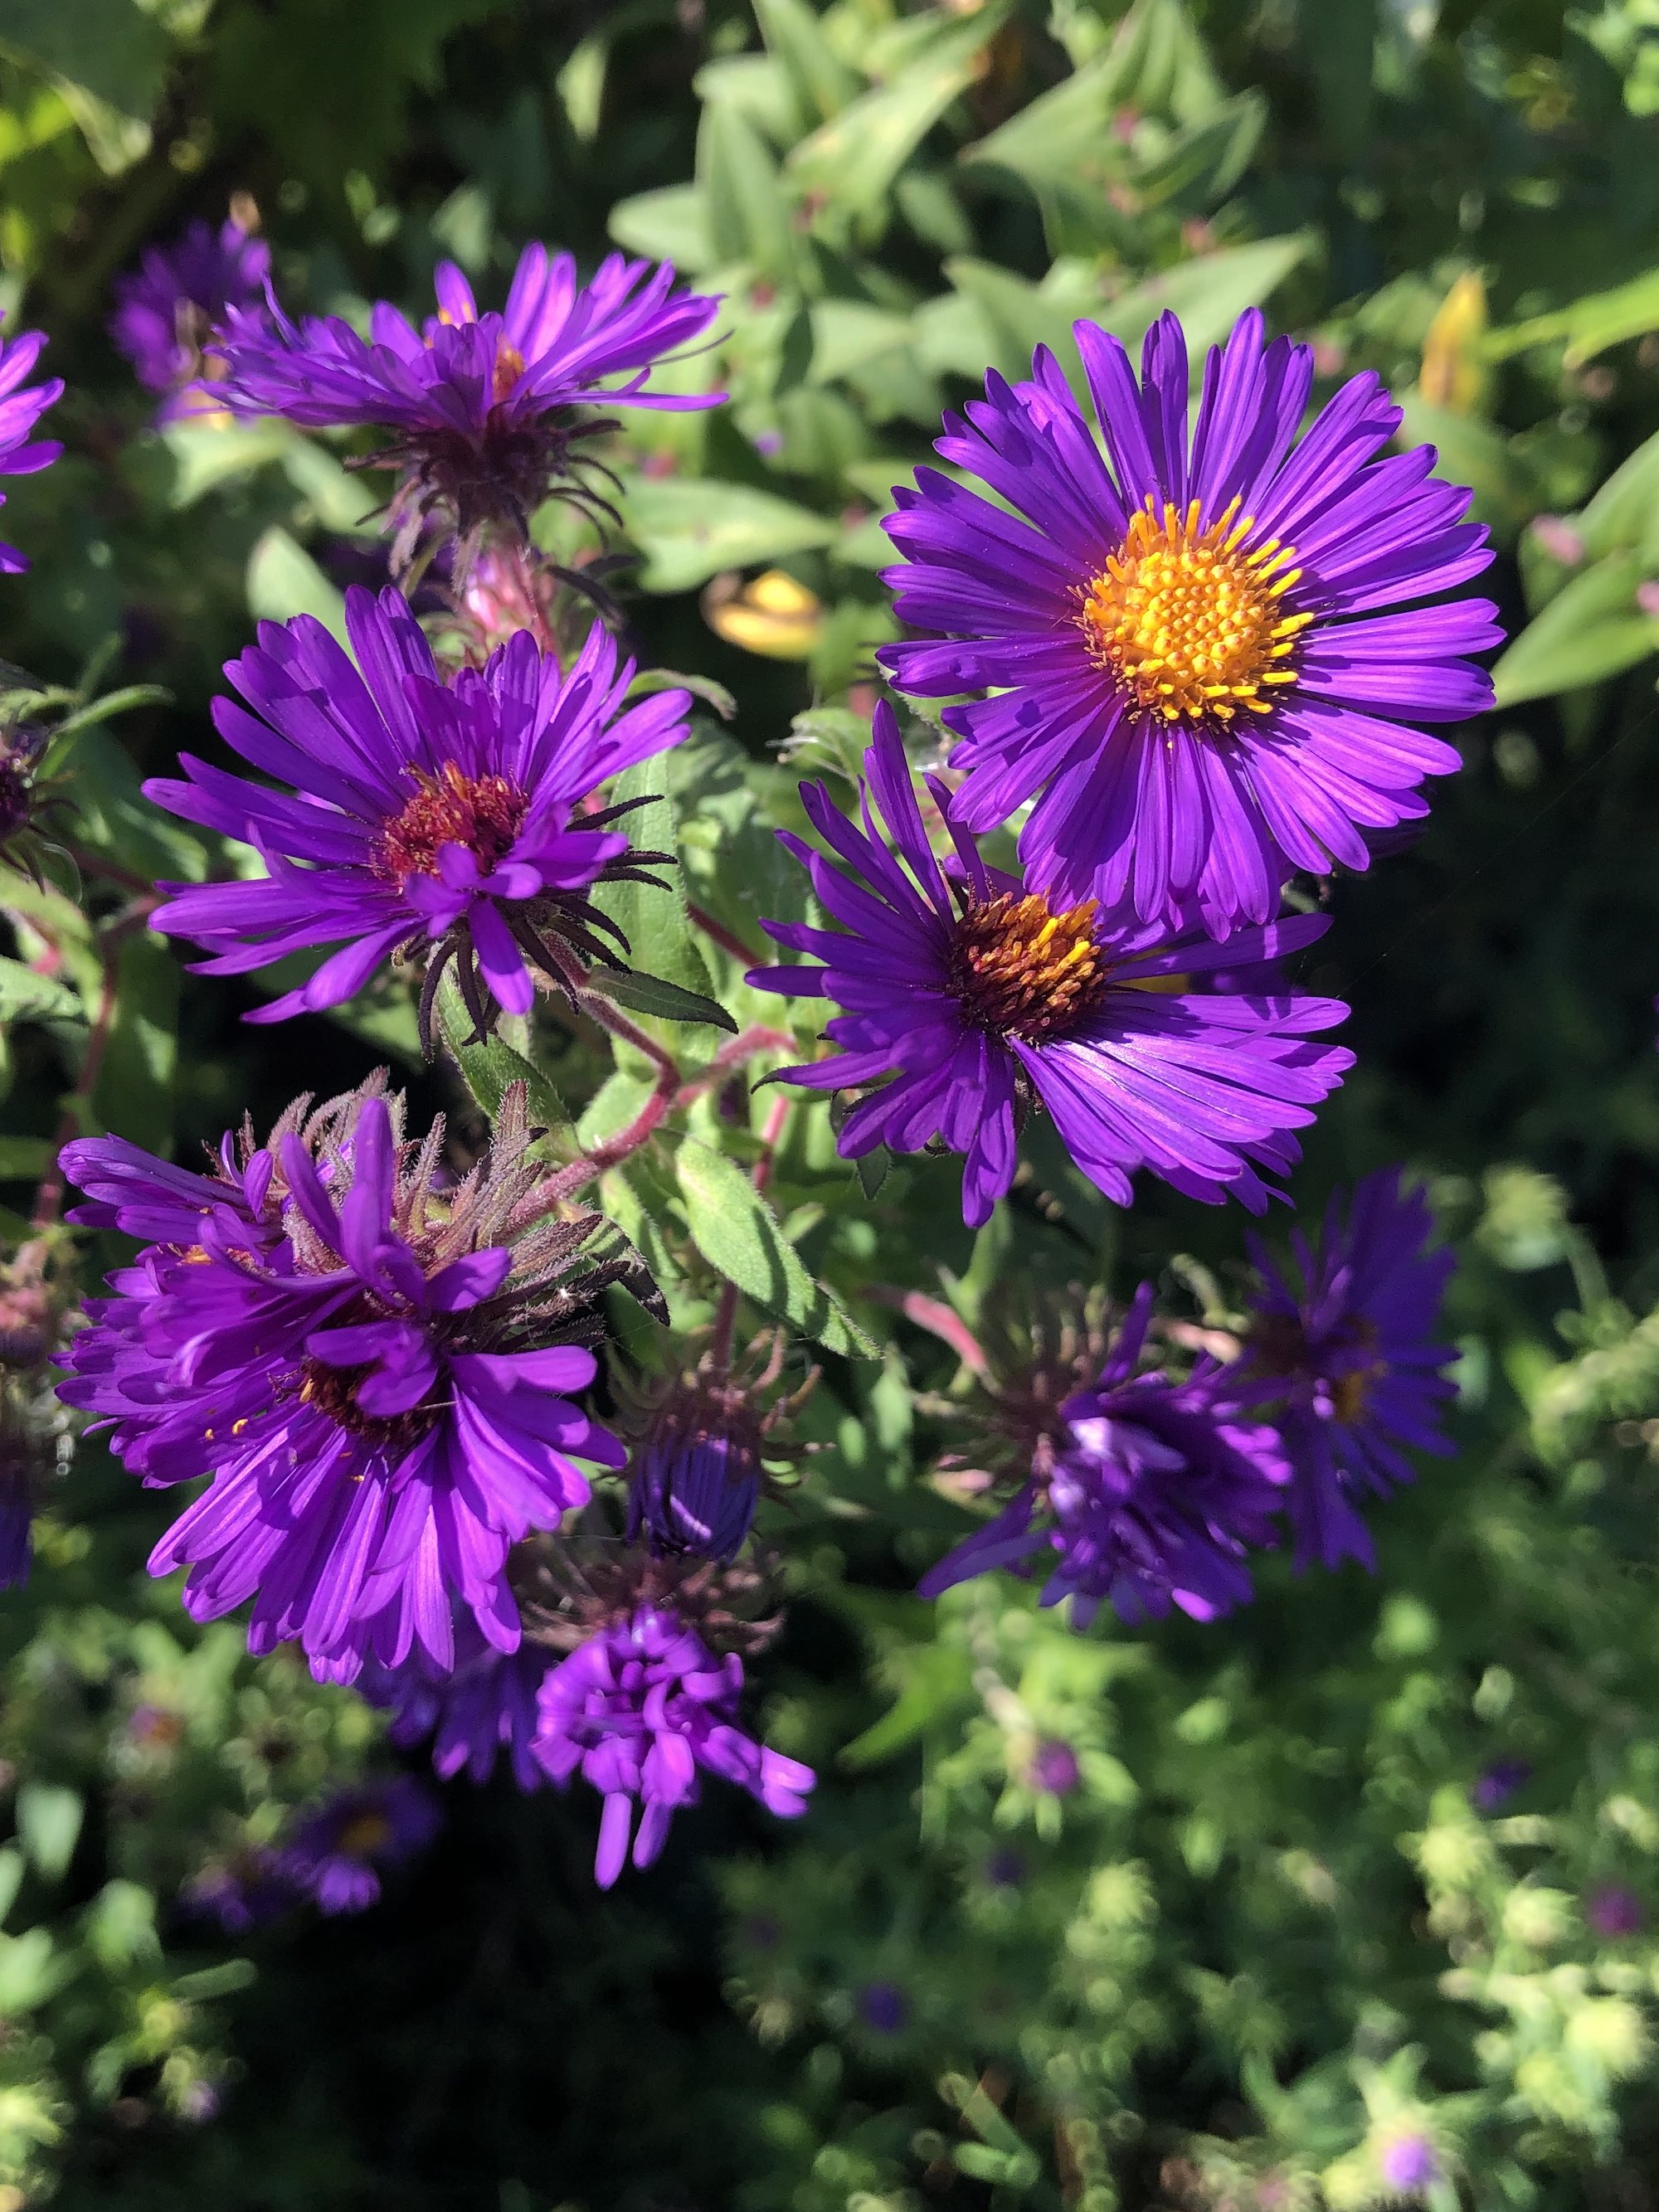 New England Aster on shore of Lake Wingra by Vilas Park in Madison, Wisconsin on September 19, 2022.